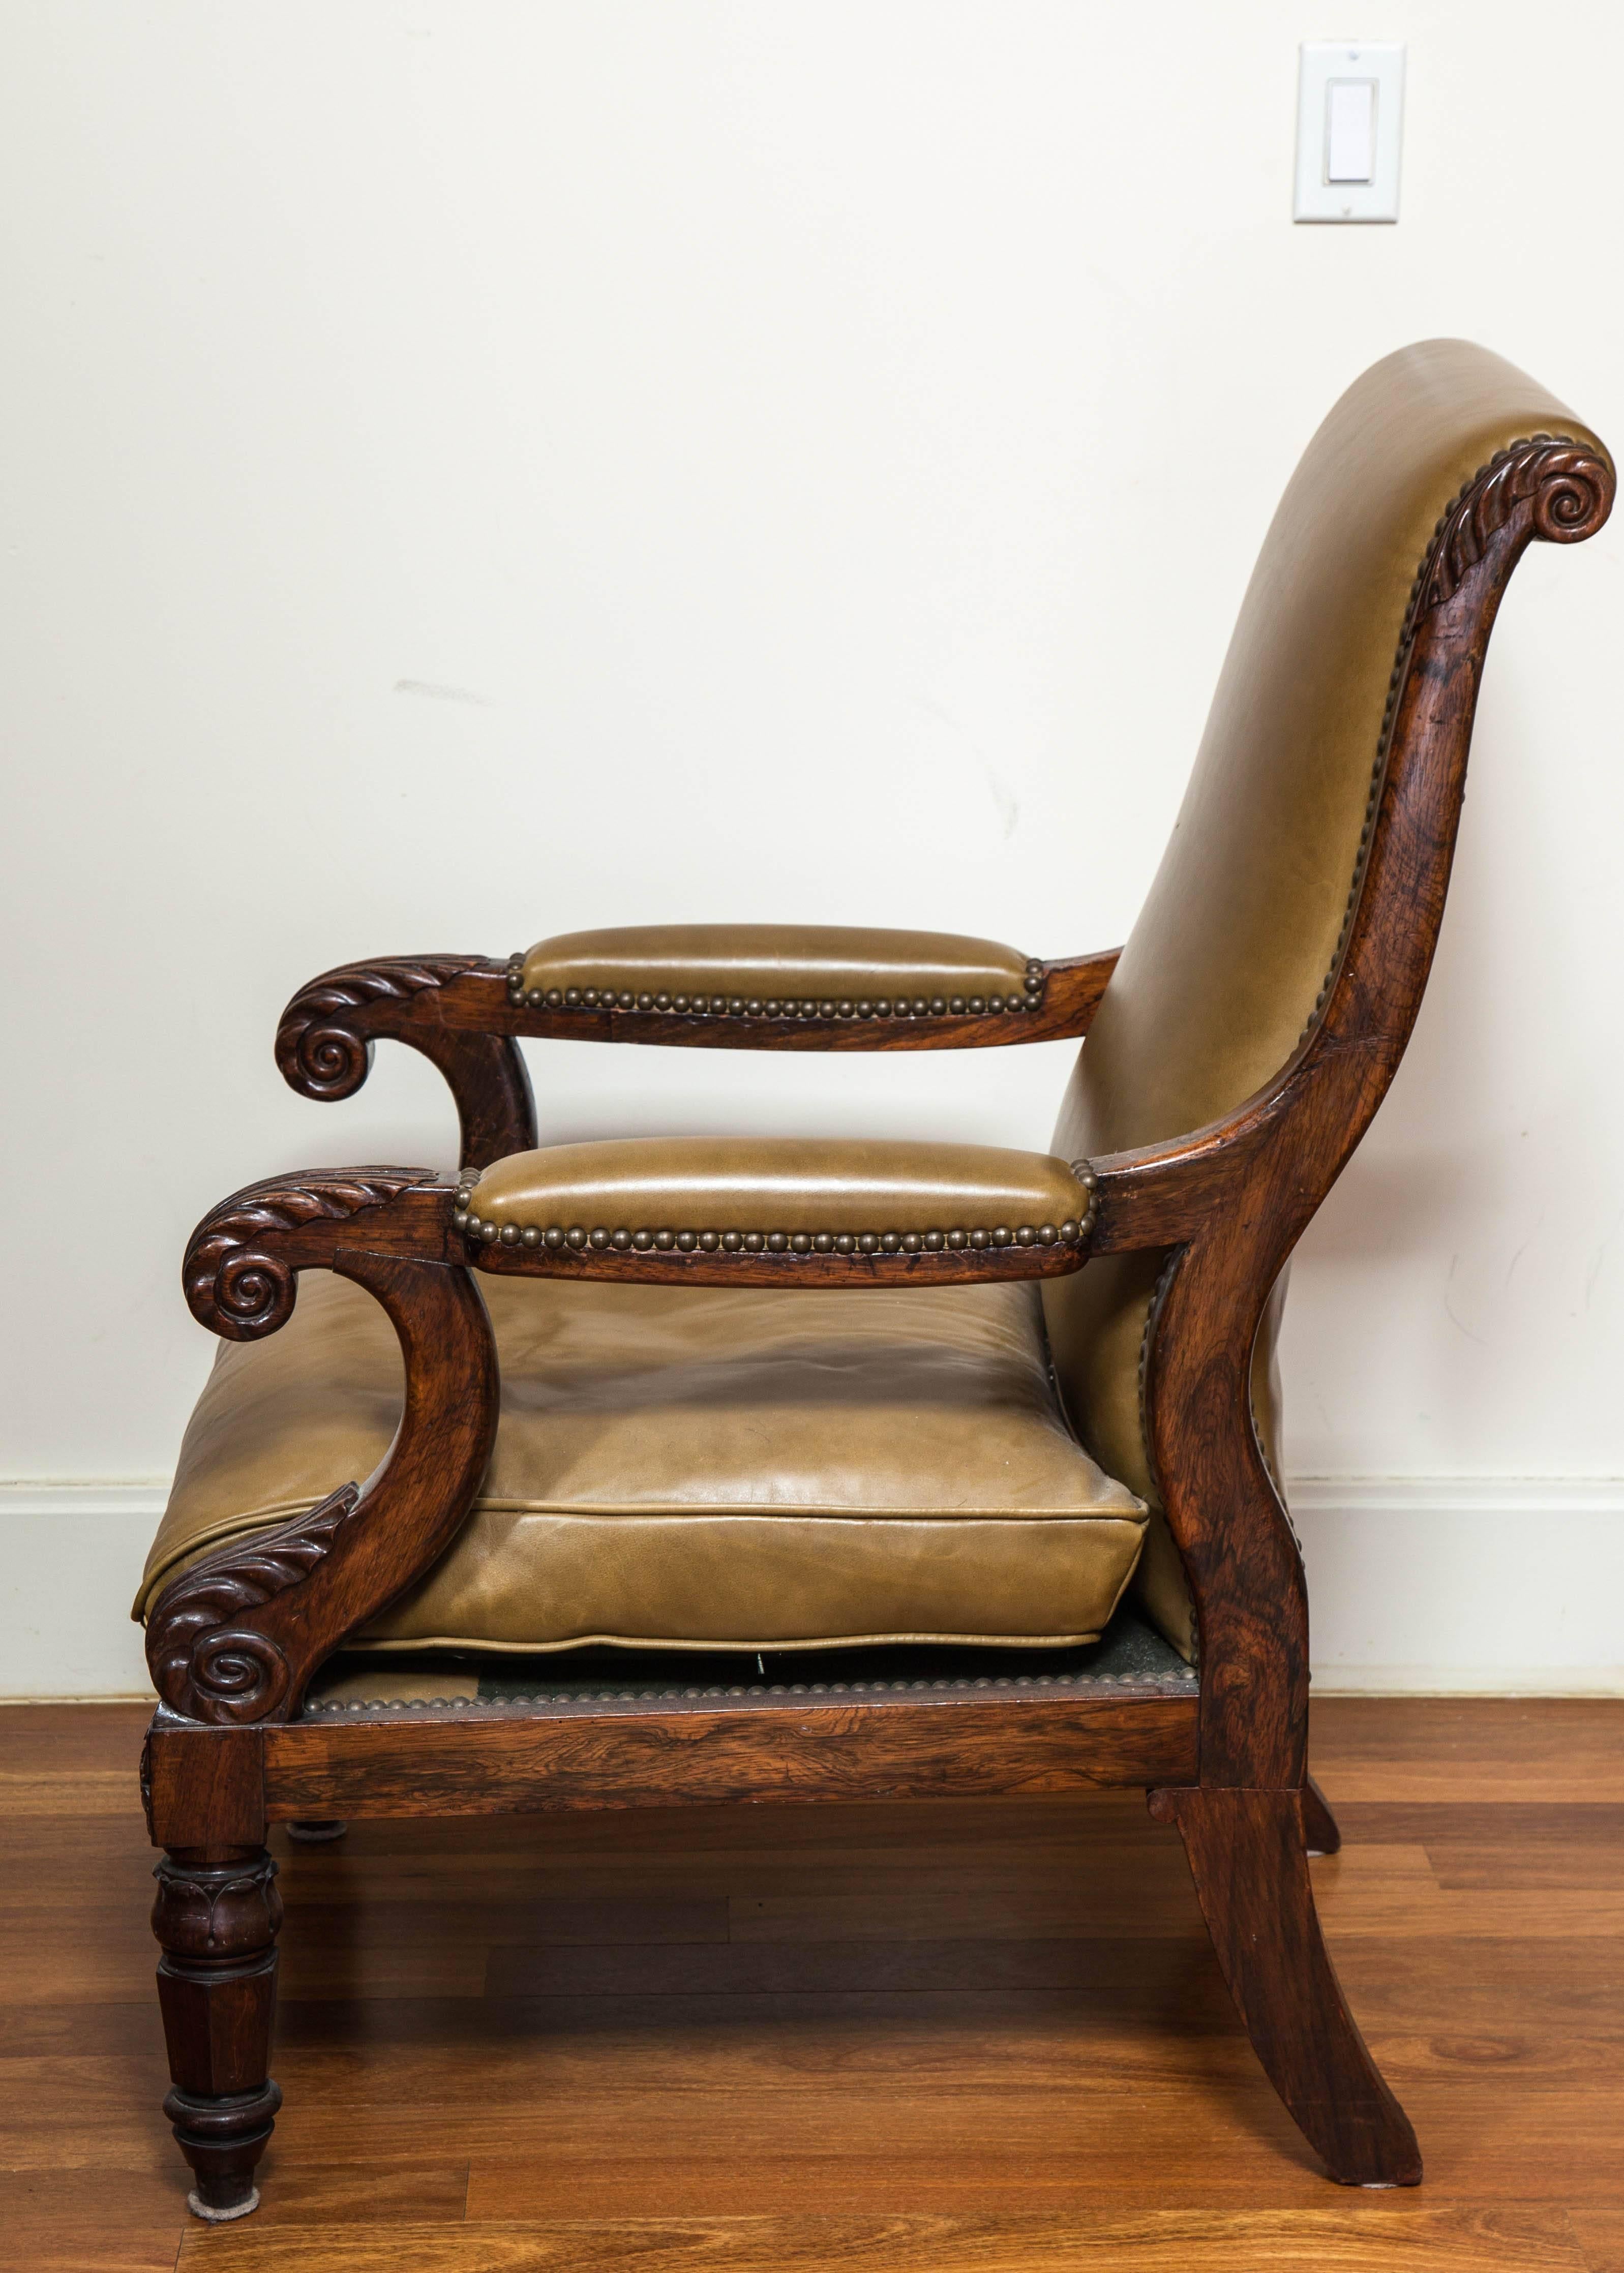 19th Century Regal William IV Carved Rosewood Library Chair